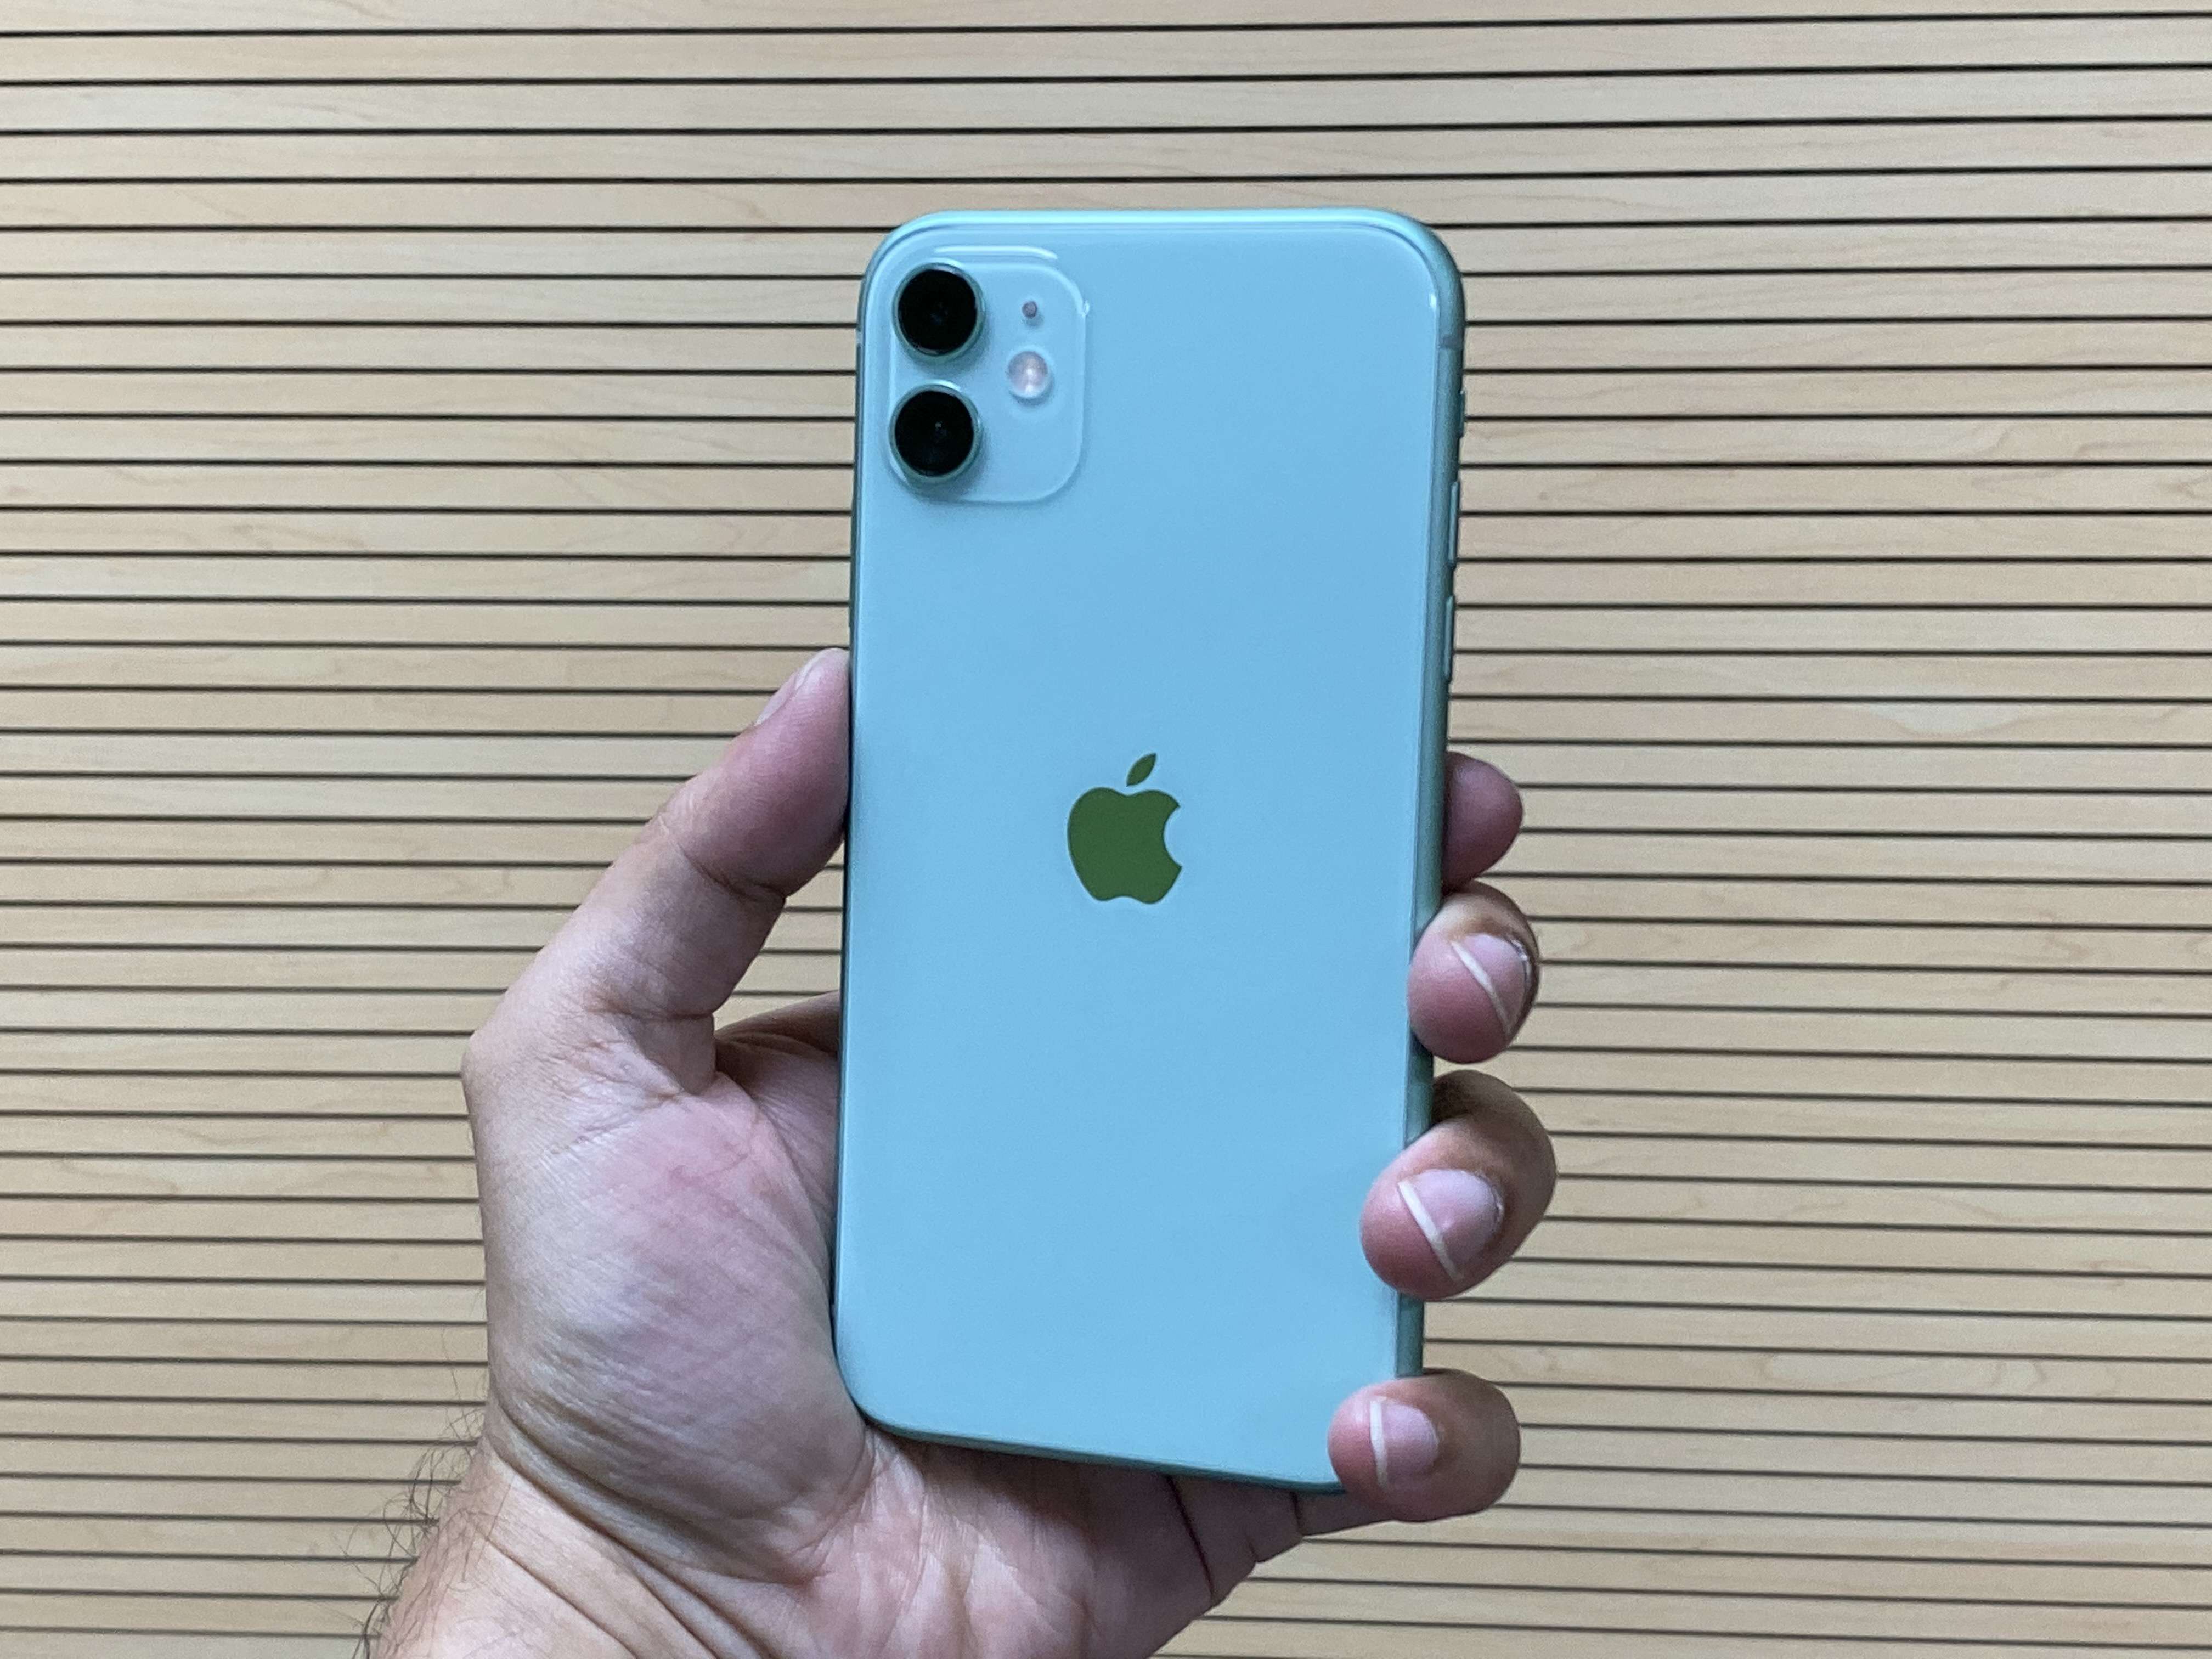 iPhone 11 Price, Specification & Features at Gadgets Now (18th Nov 2020)